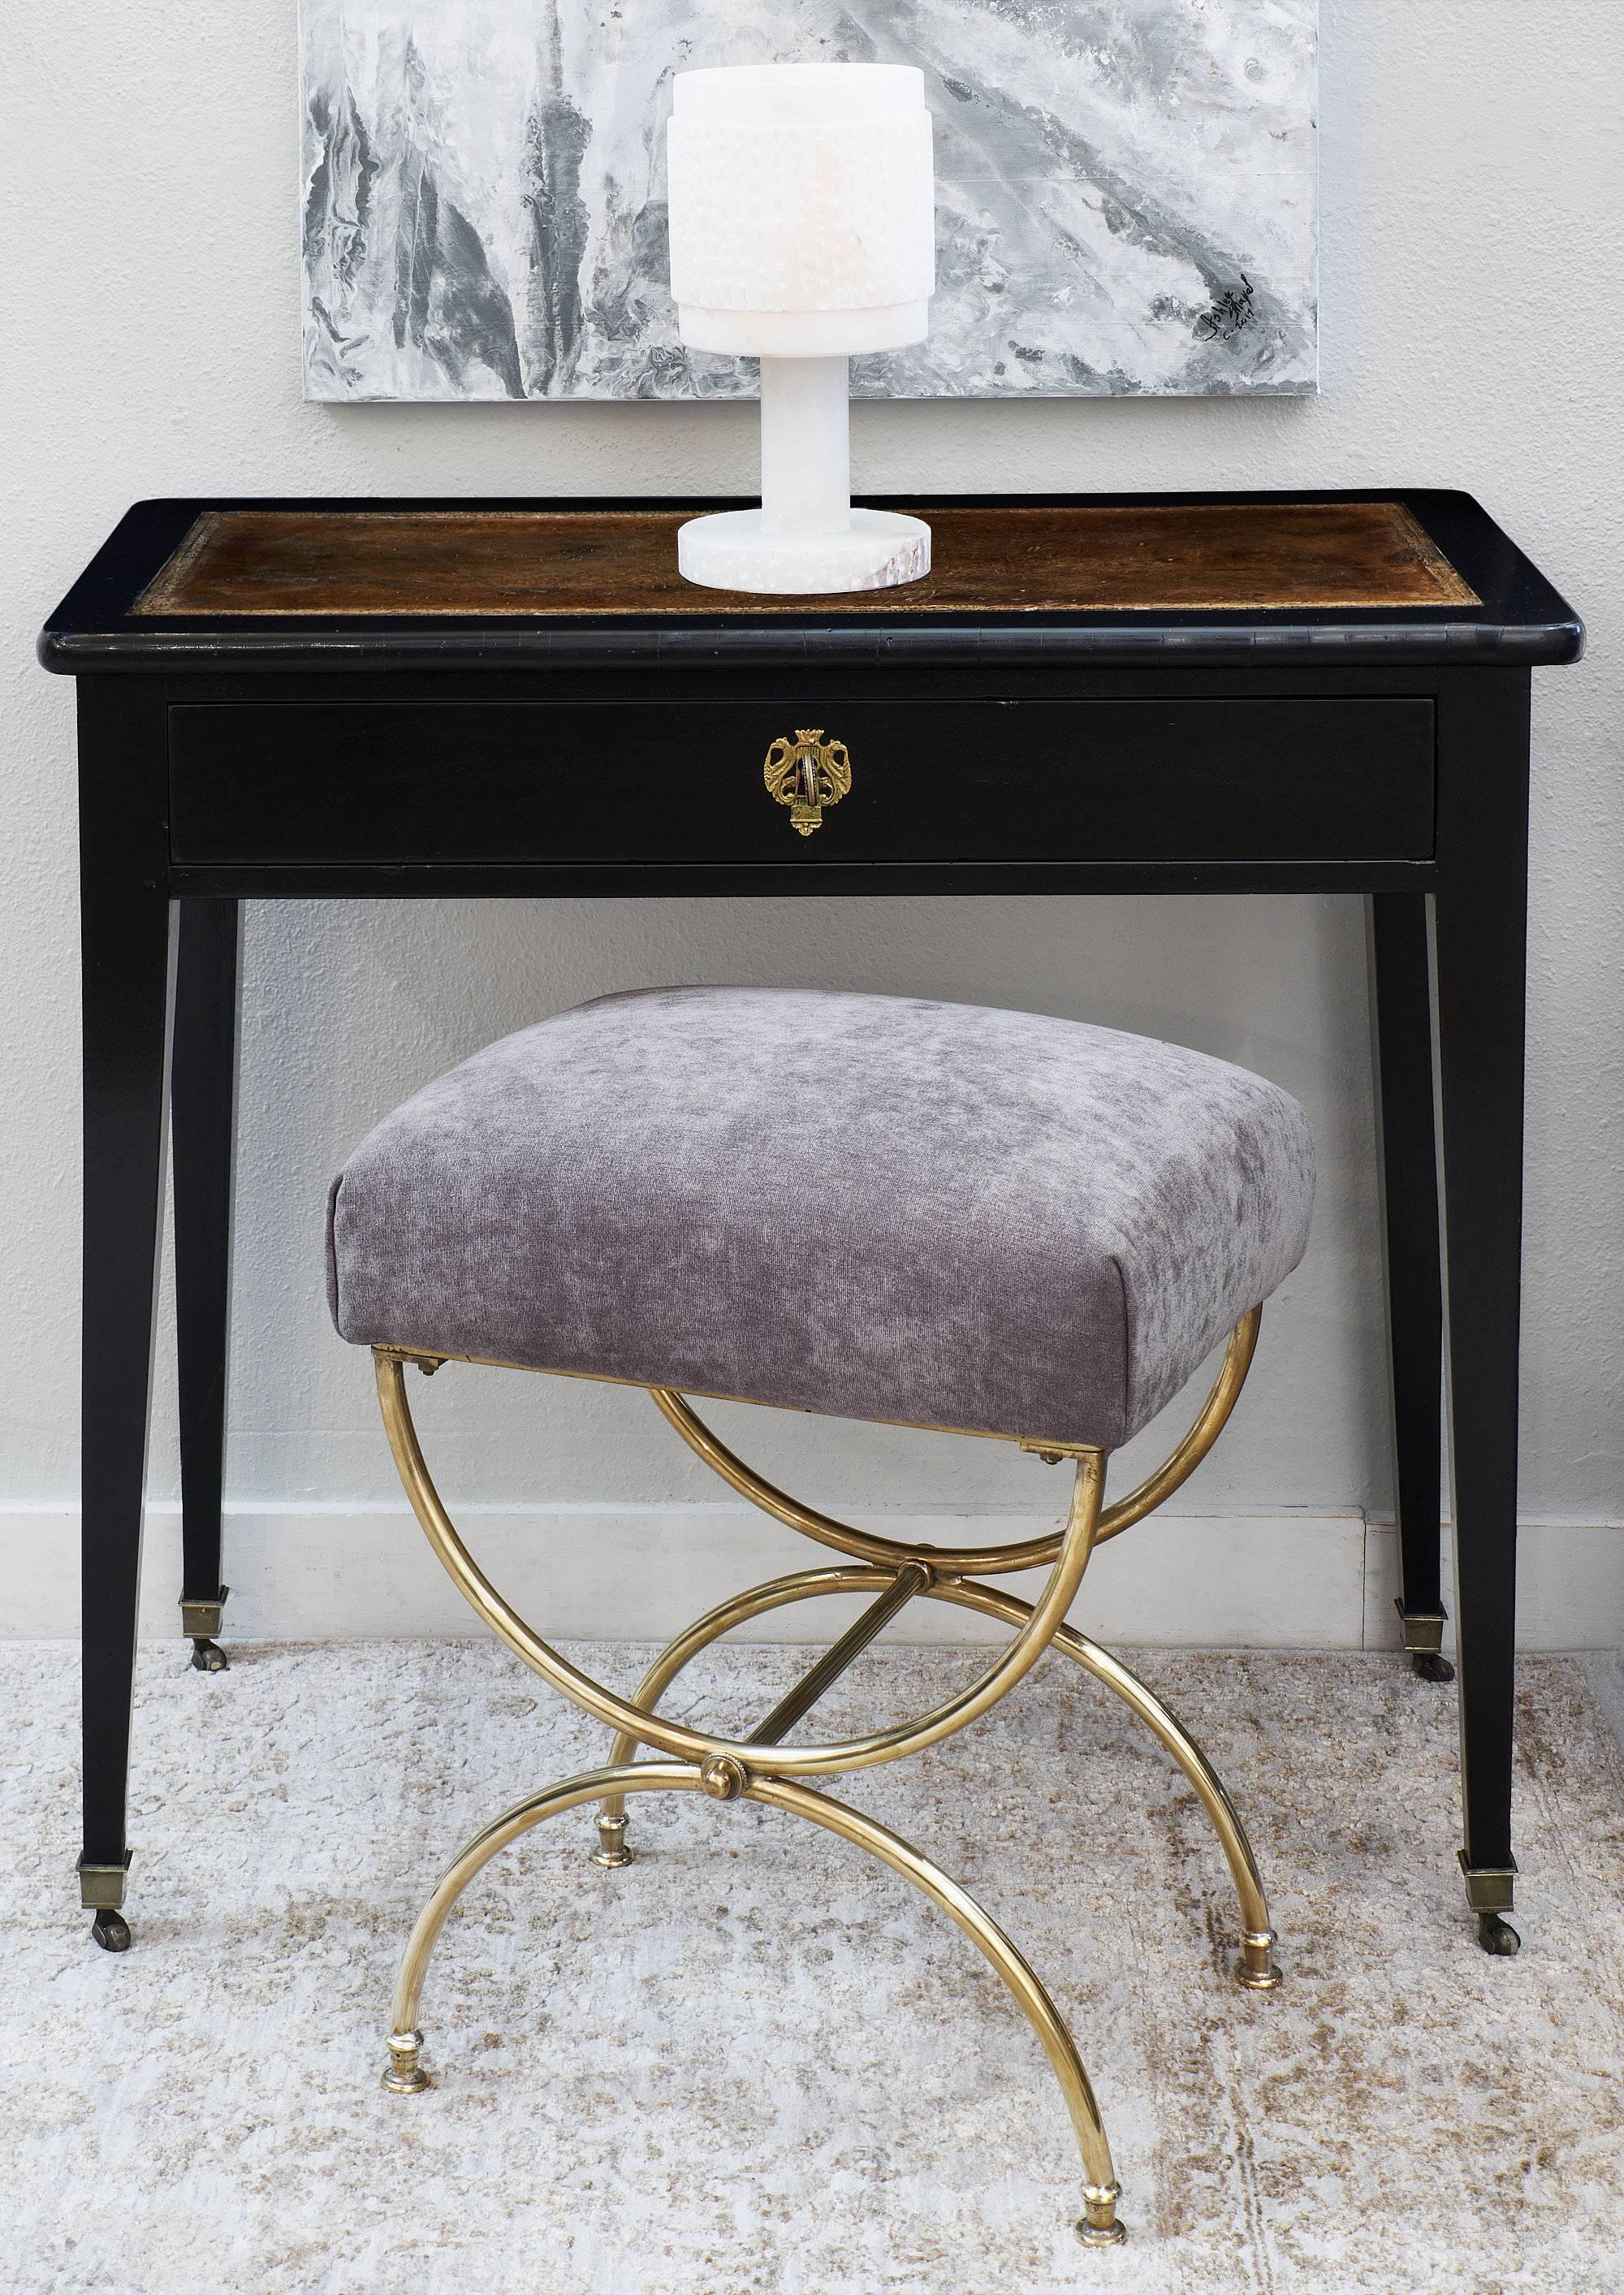 This Louis XVI style writing table or console is the perfect size for an entryway or small home office! The mahogany piece has been ebonized and finished with a French polish for a lustrous glow. The table has one dovetailed drawer with original